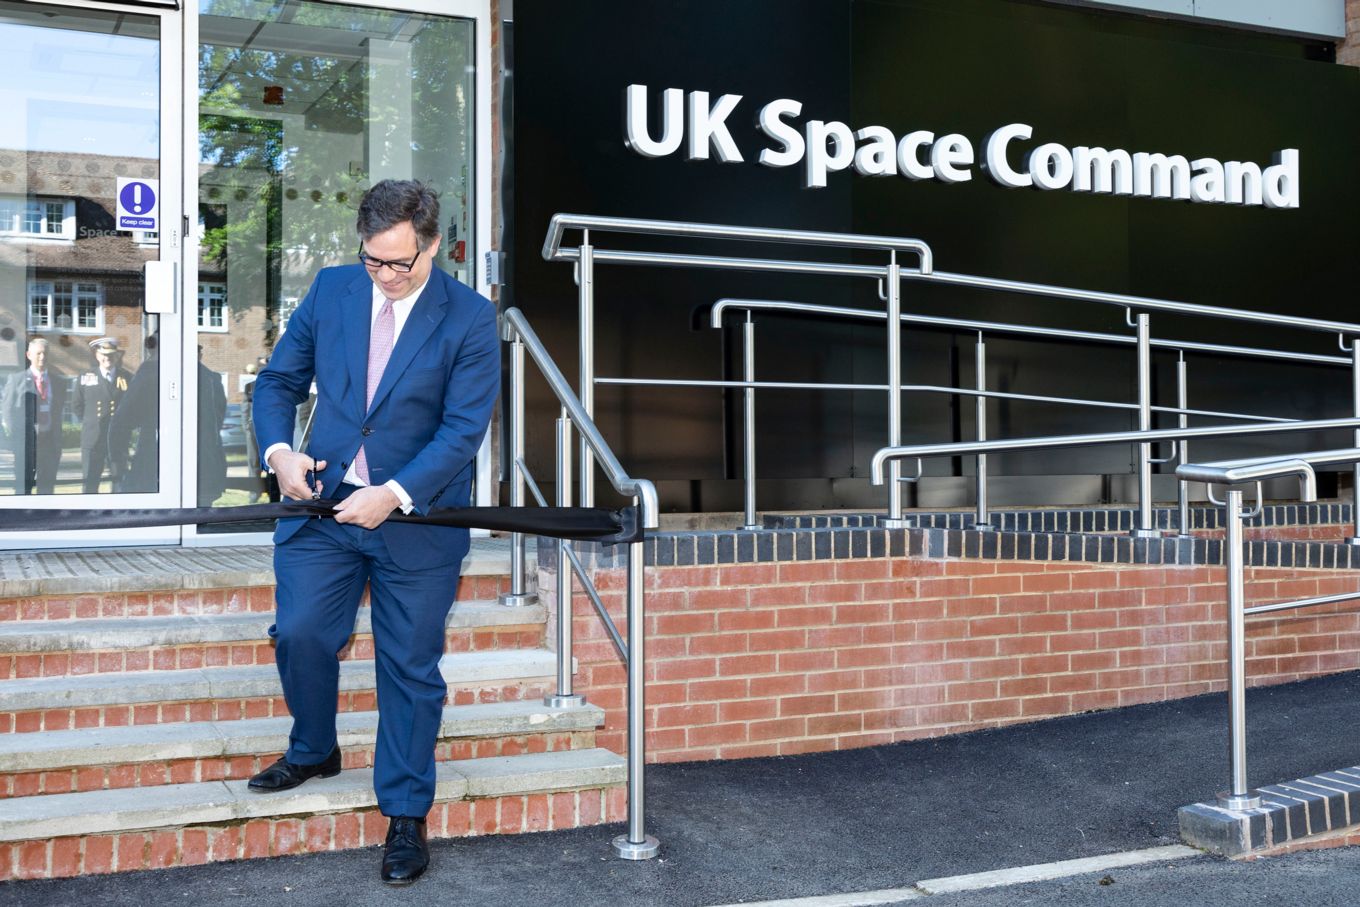 Cutting the tape outside the UK Space Command building. 